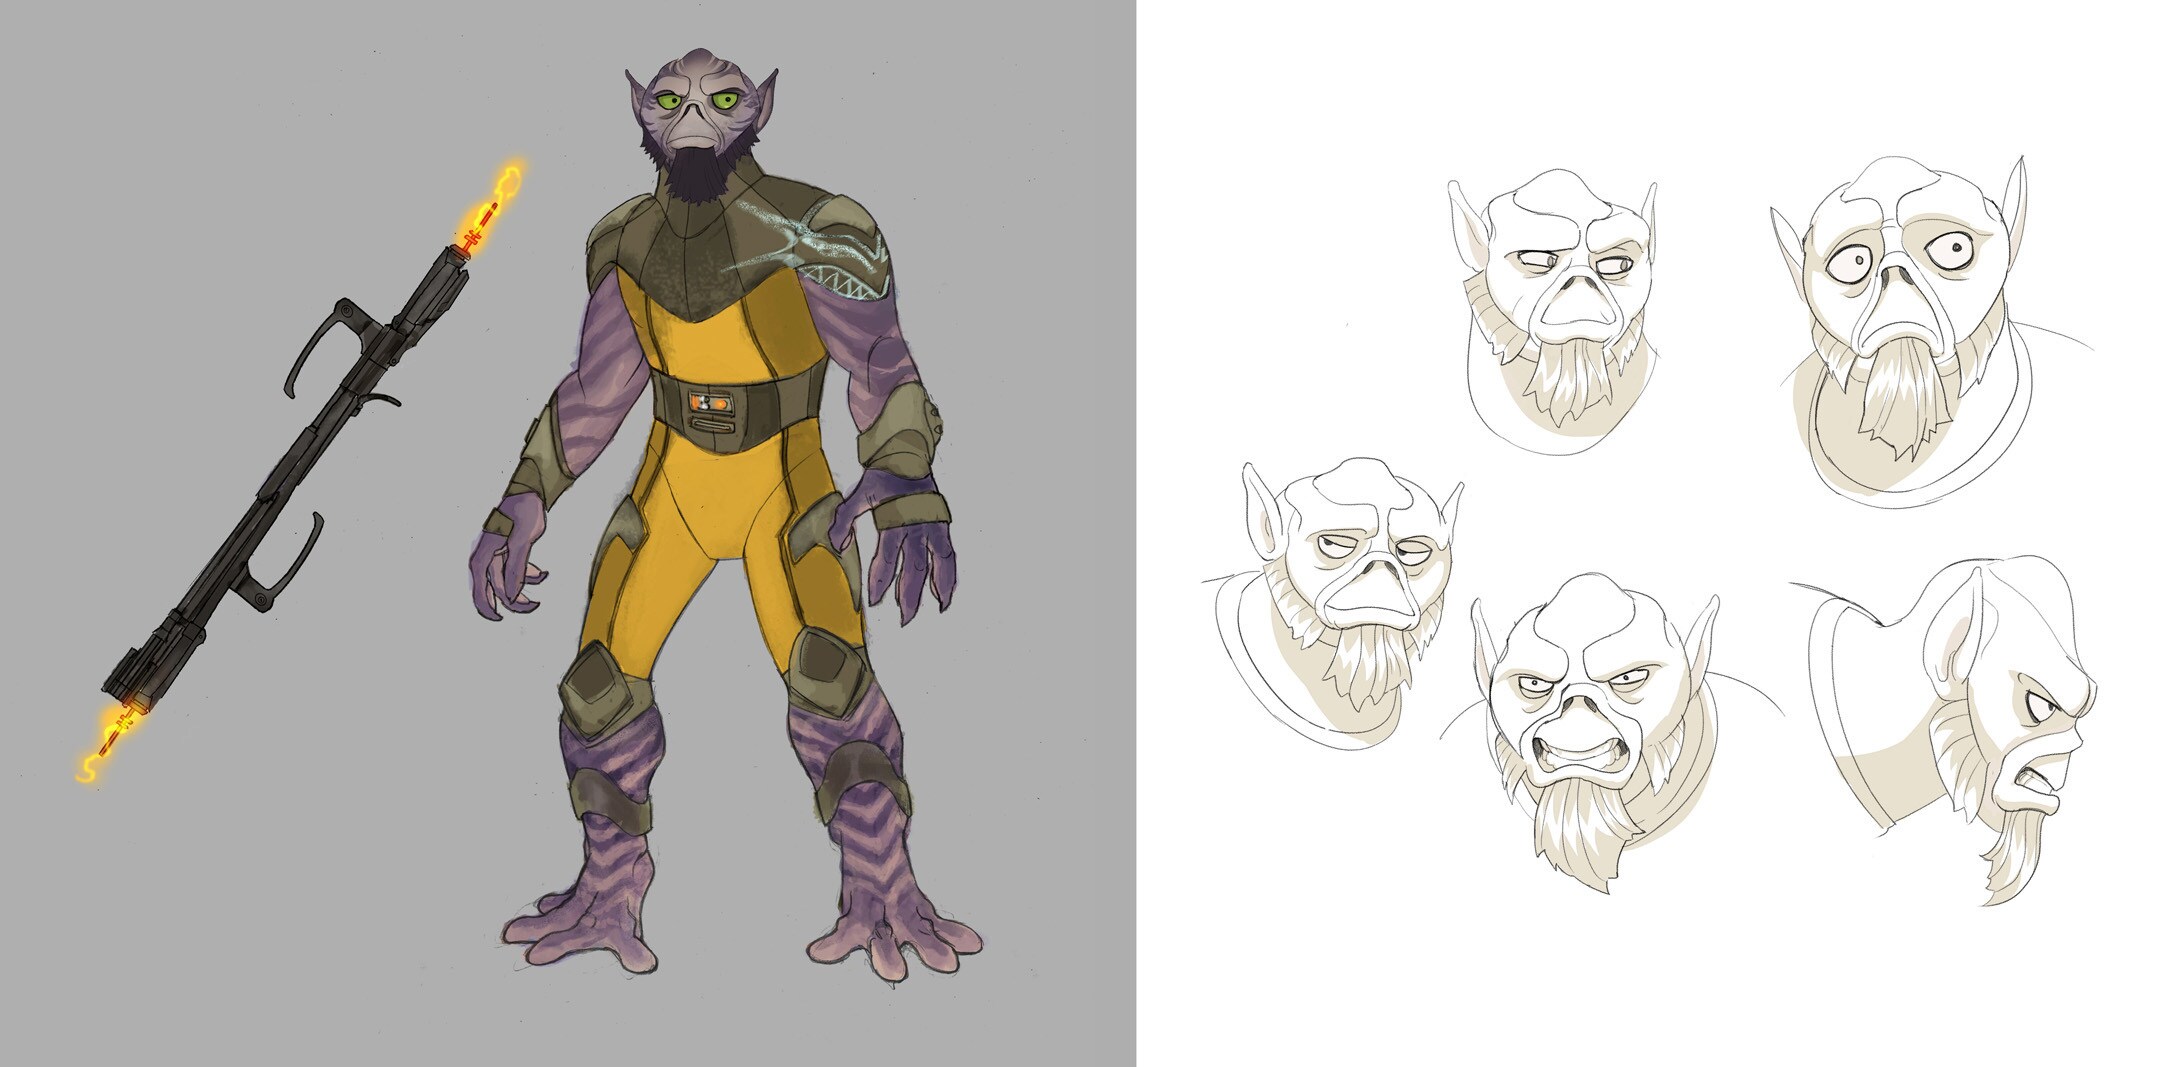 Zeb Orrelios full character illustration and facial expression designs.